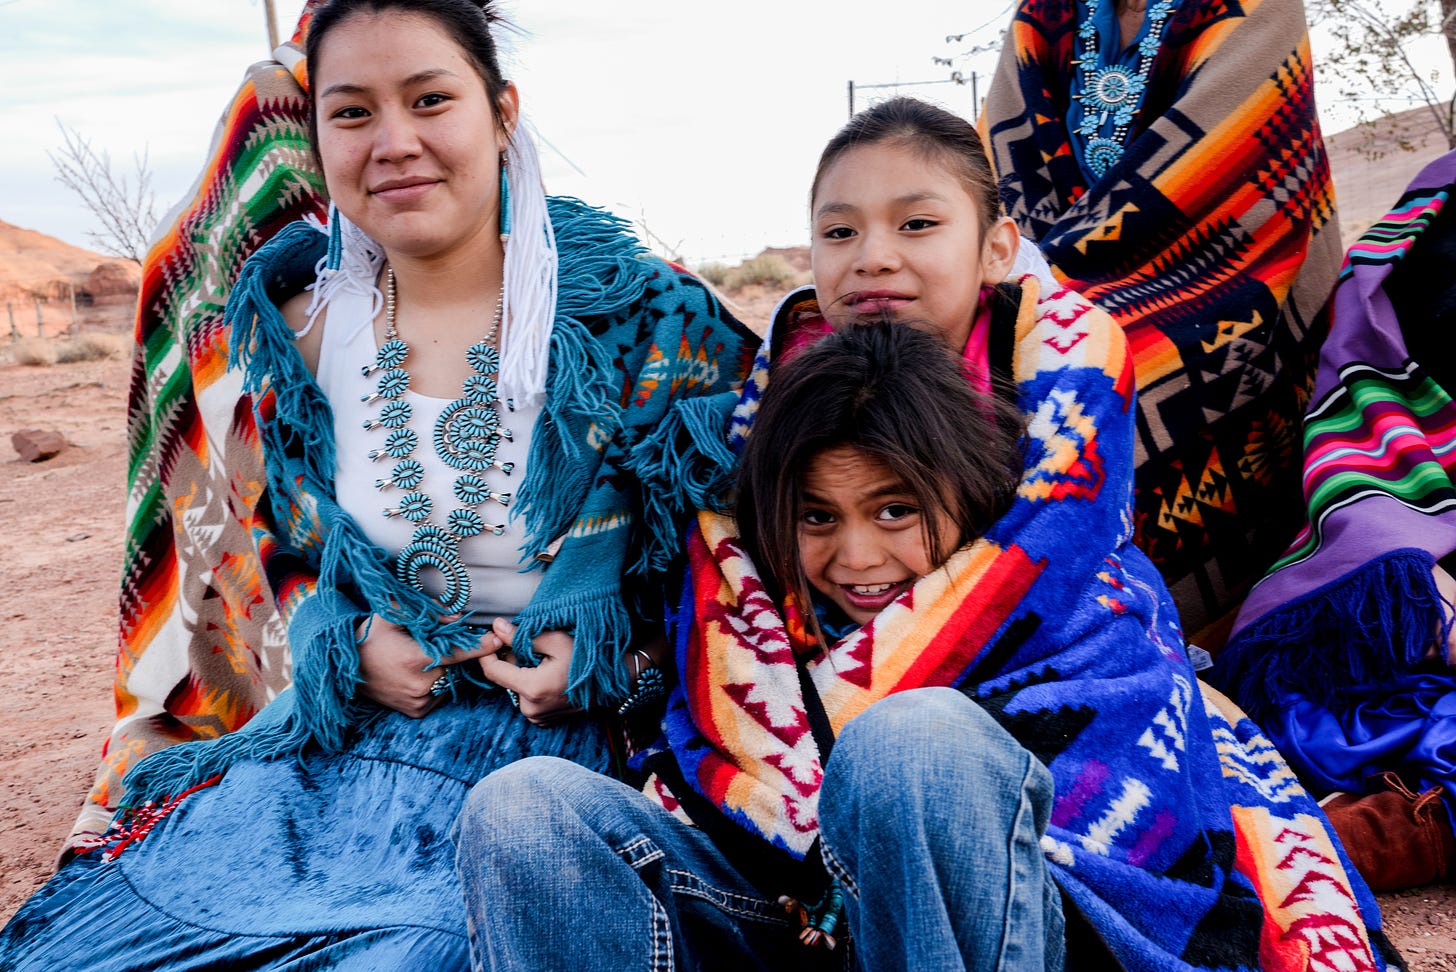 A Native American family sits together.